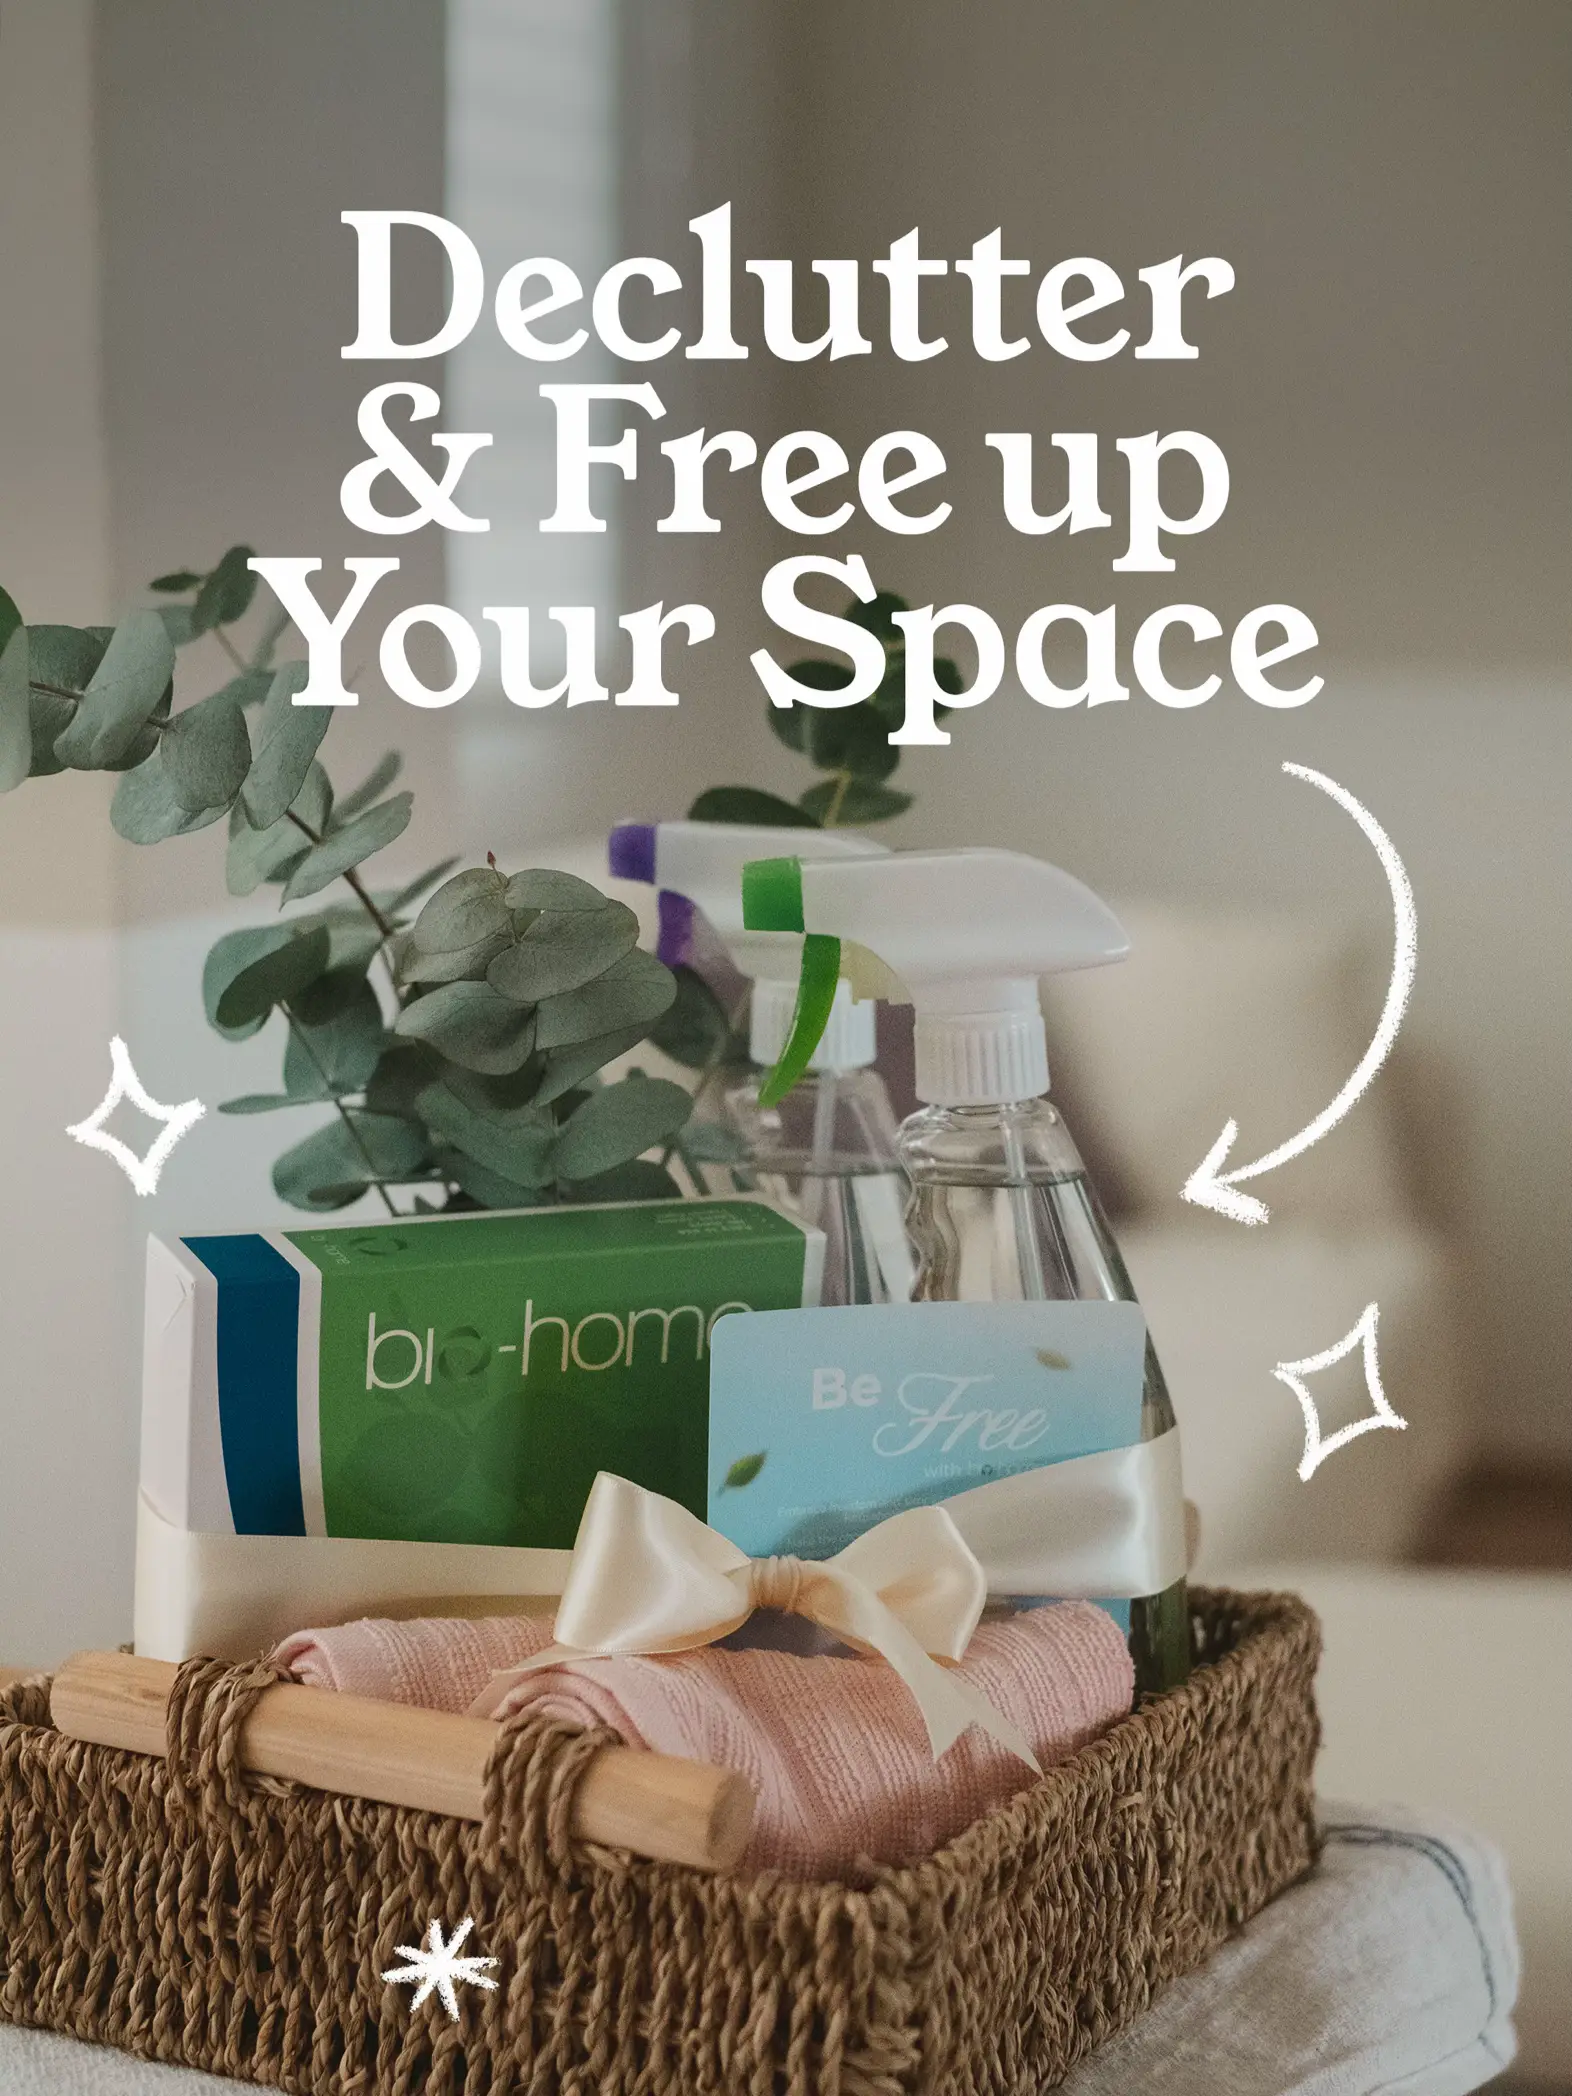 Laundry Sheets?😮Multi-surface cleaner?✨Home Hacks's images